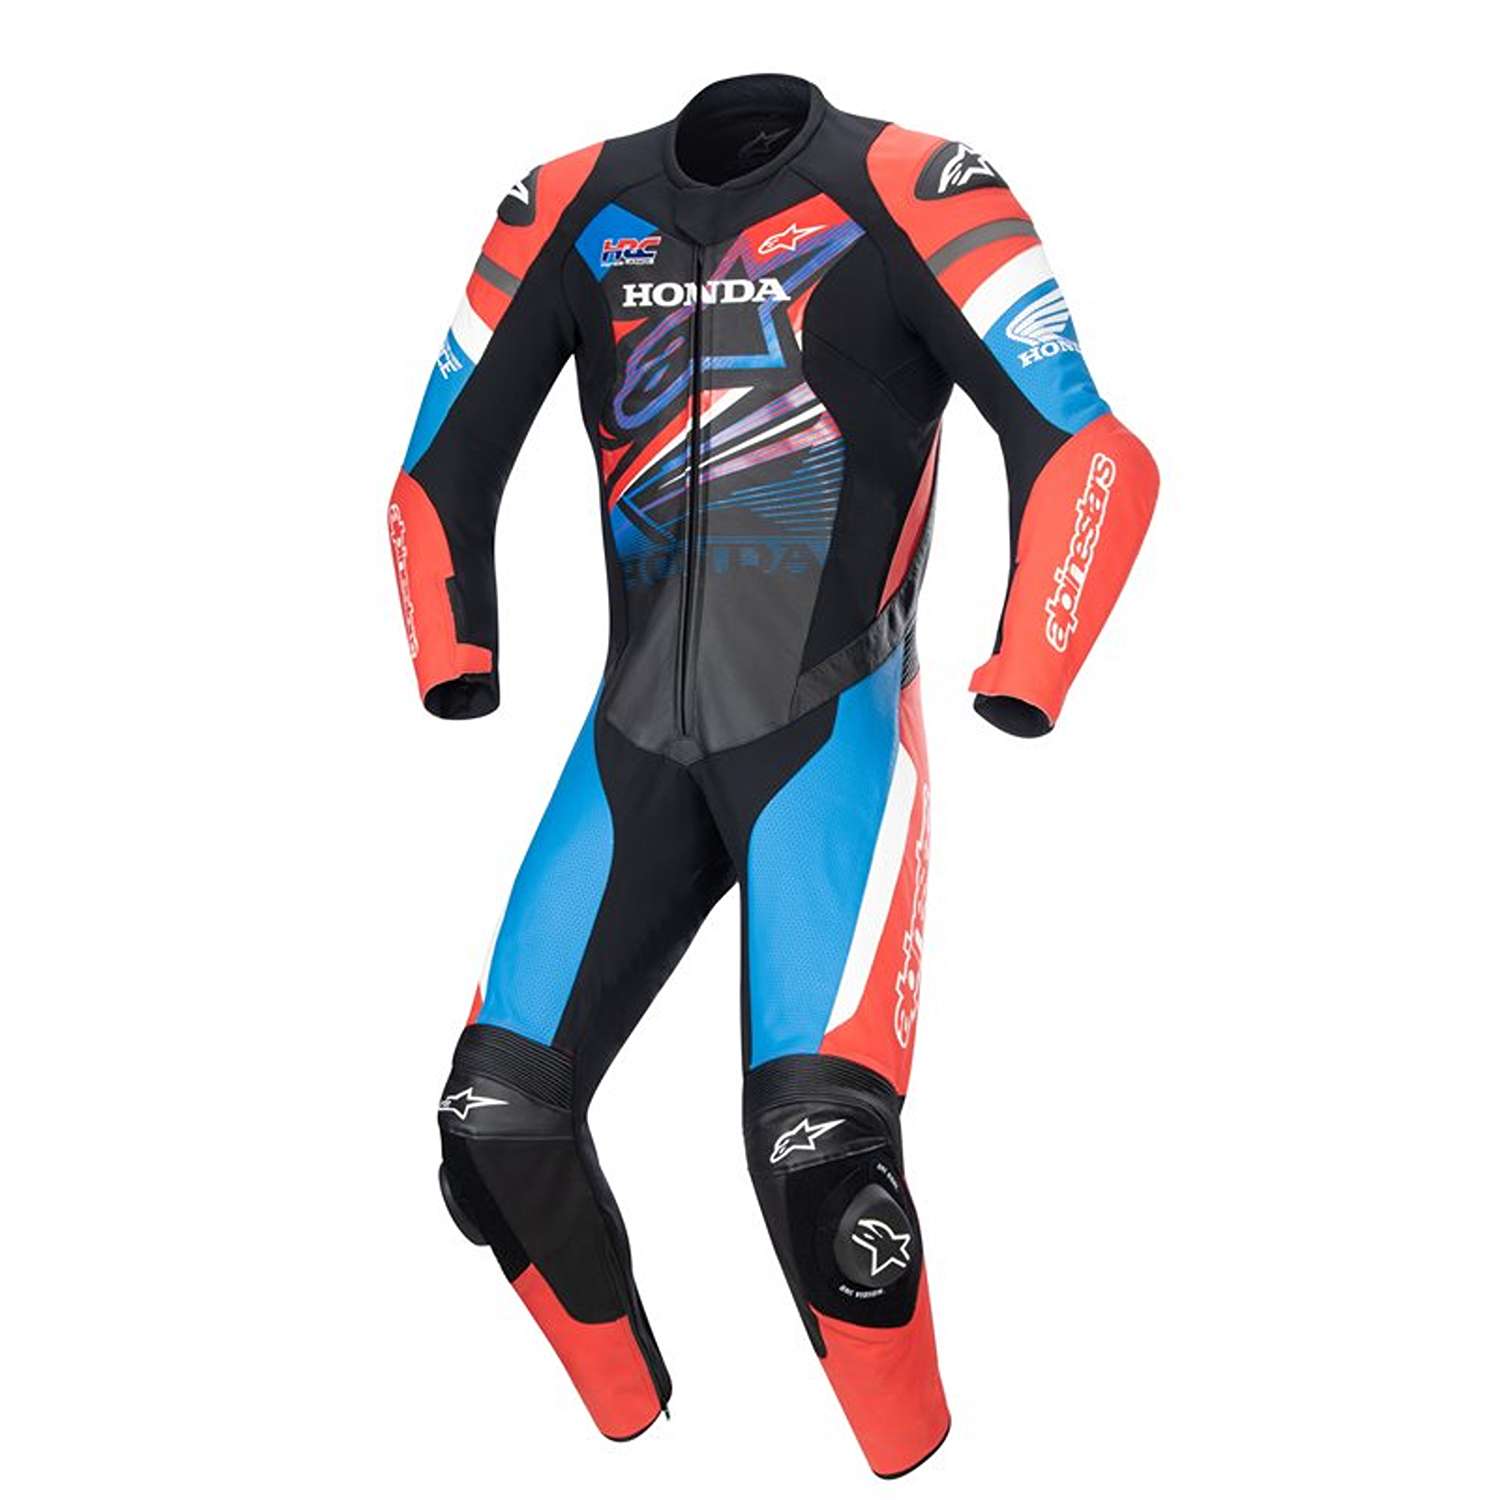 Image of Alpinestars Honda Gp Force Leather Suit Black Bright Red Blue Taille 54